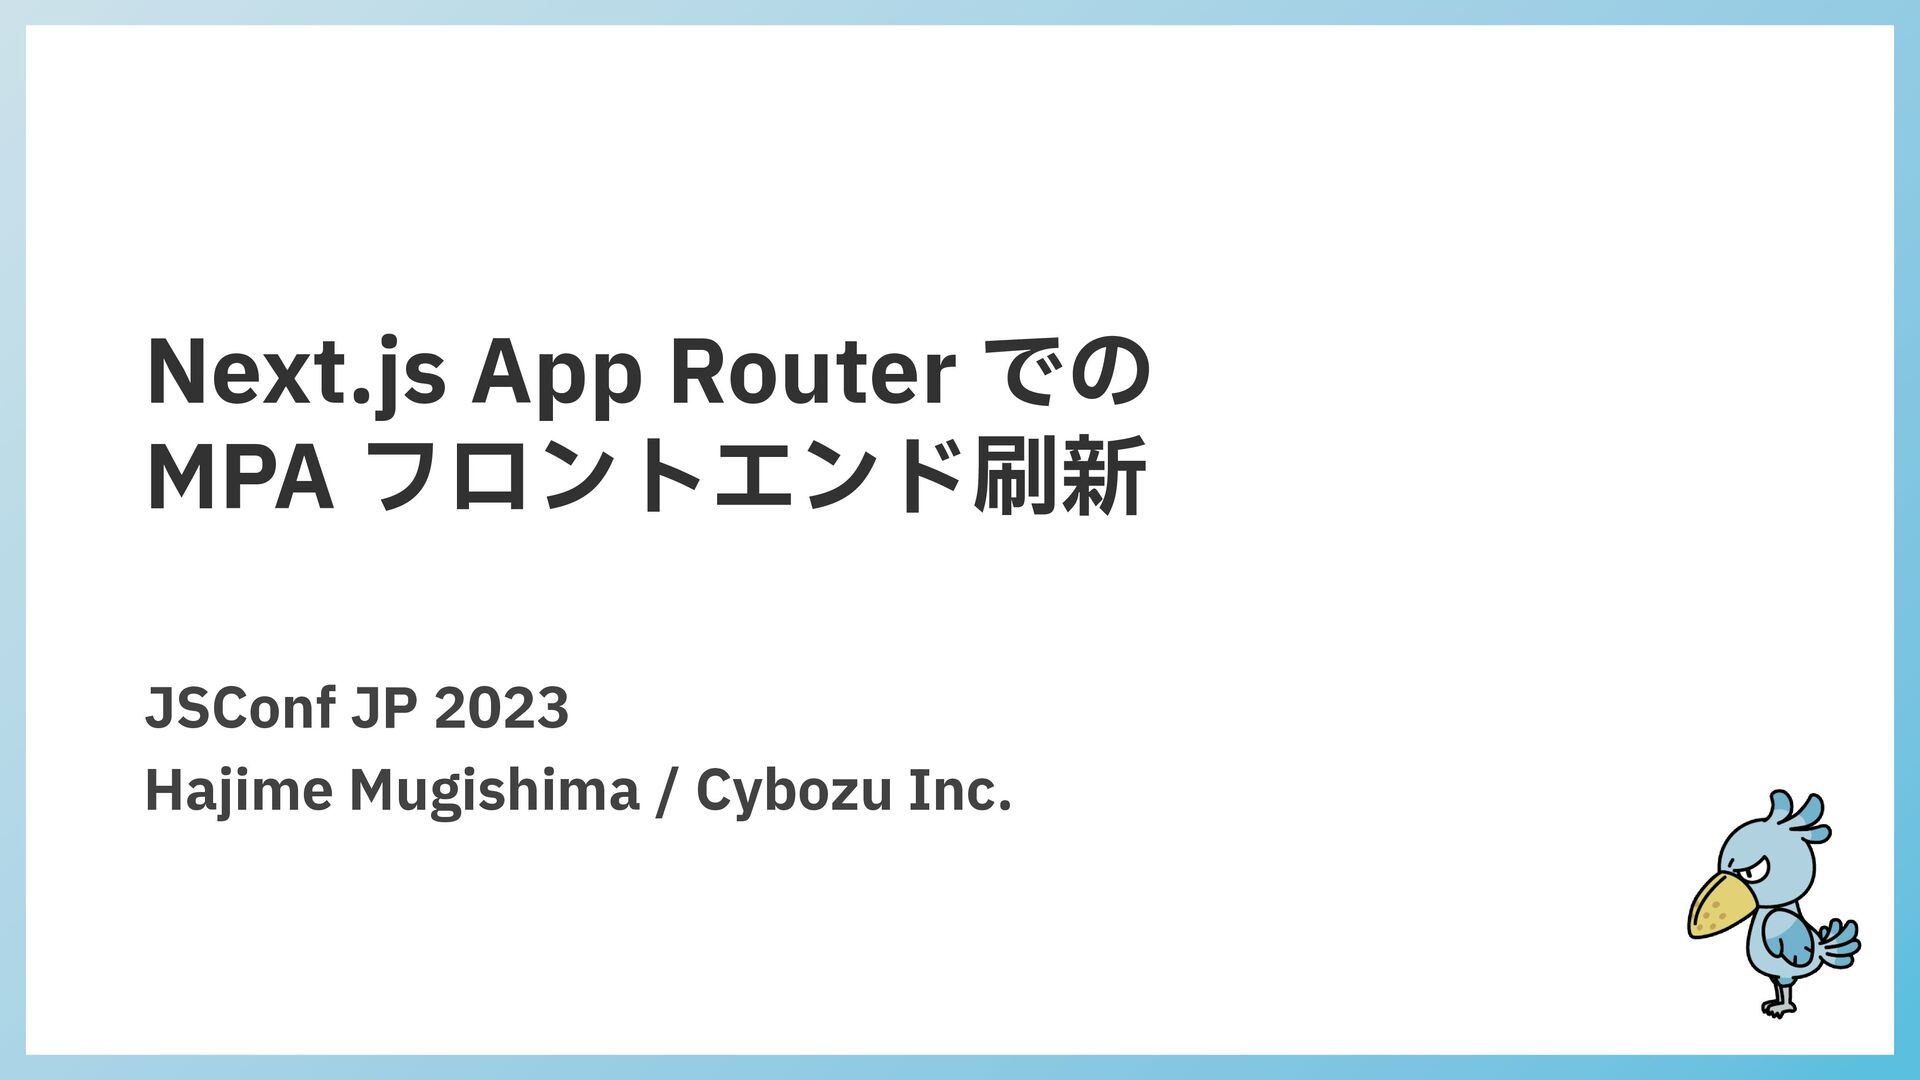 Slide Top: Next.js App Router での MPA フロントエンド刷新